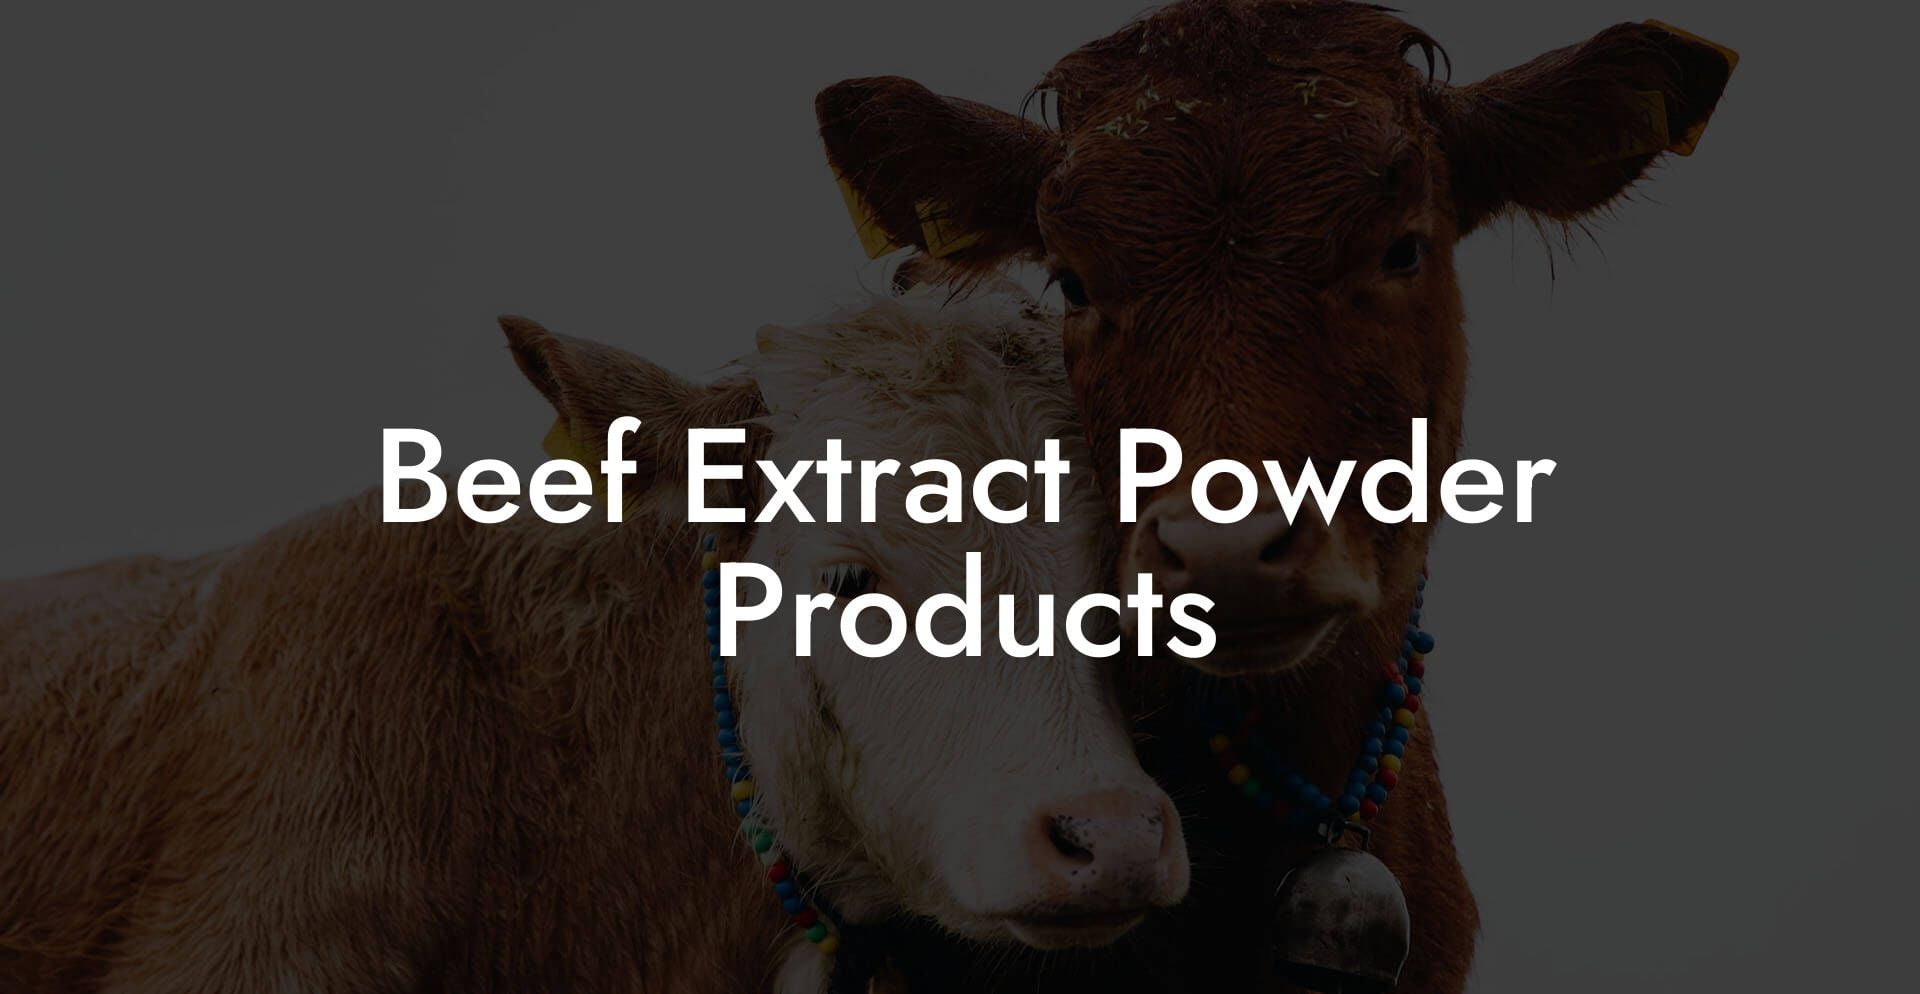 Beef Extract Powder Products